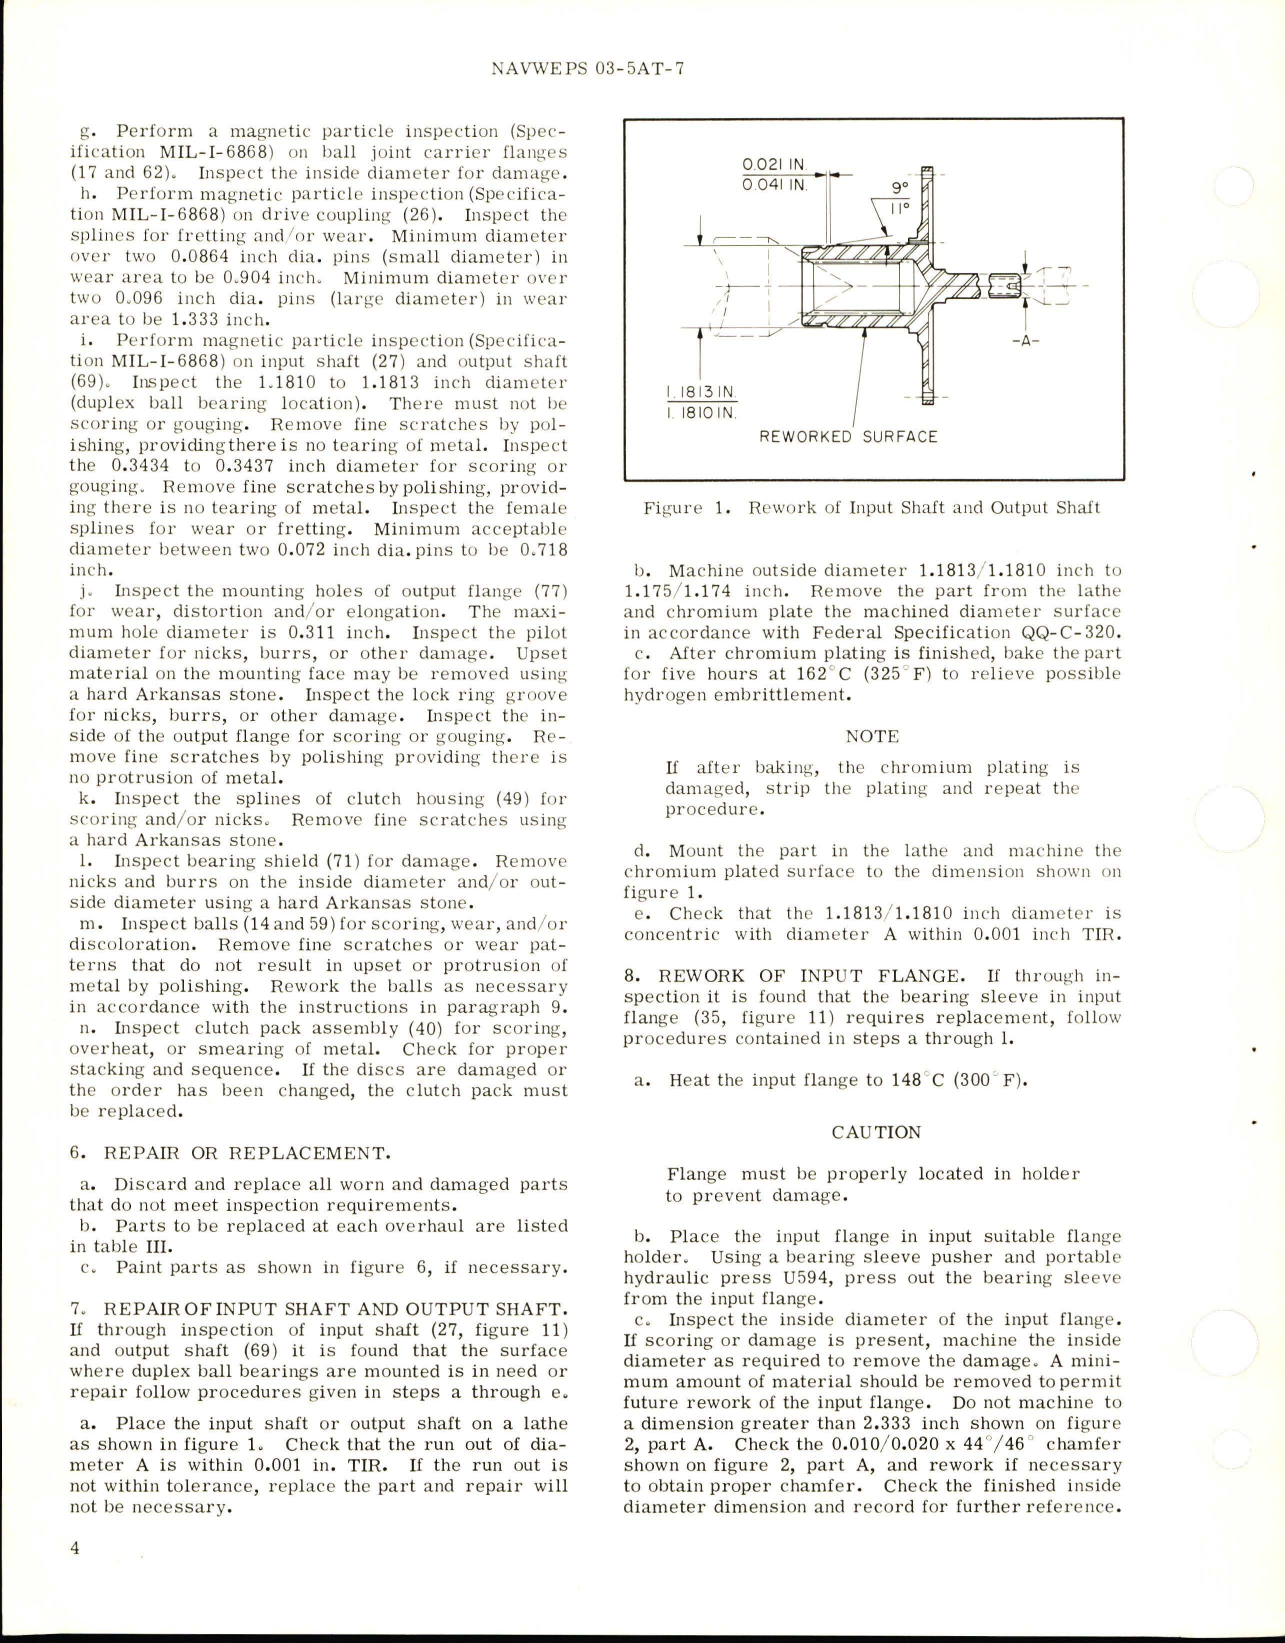 Sample page 6 from AirCorps Library document: Overhaul Instructions with Parts Breakdown for Constant Ratio Power Transmission Shaft 